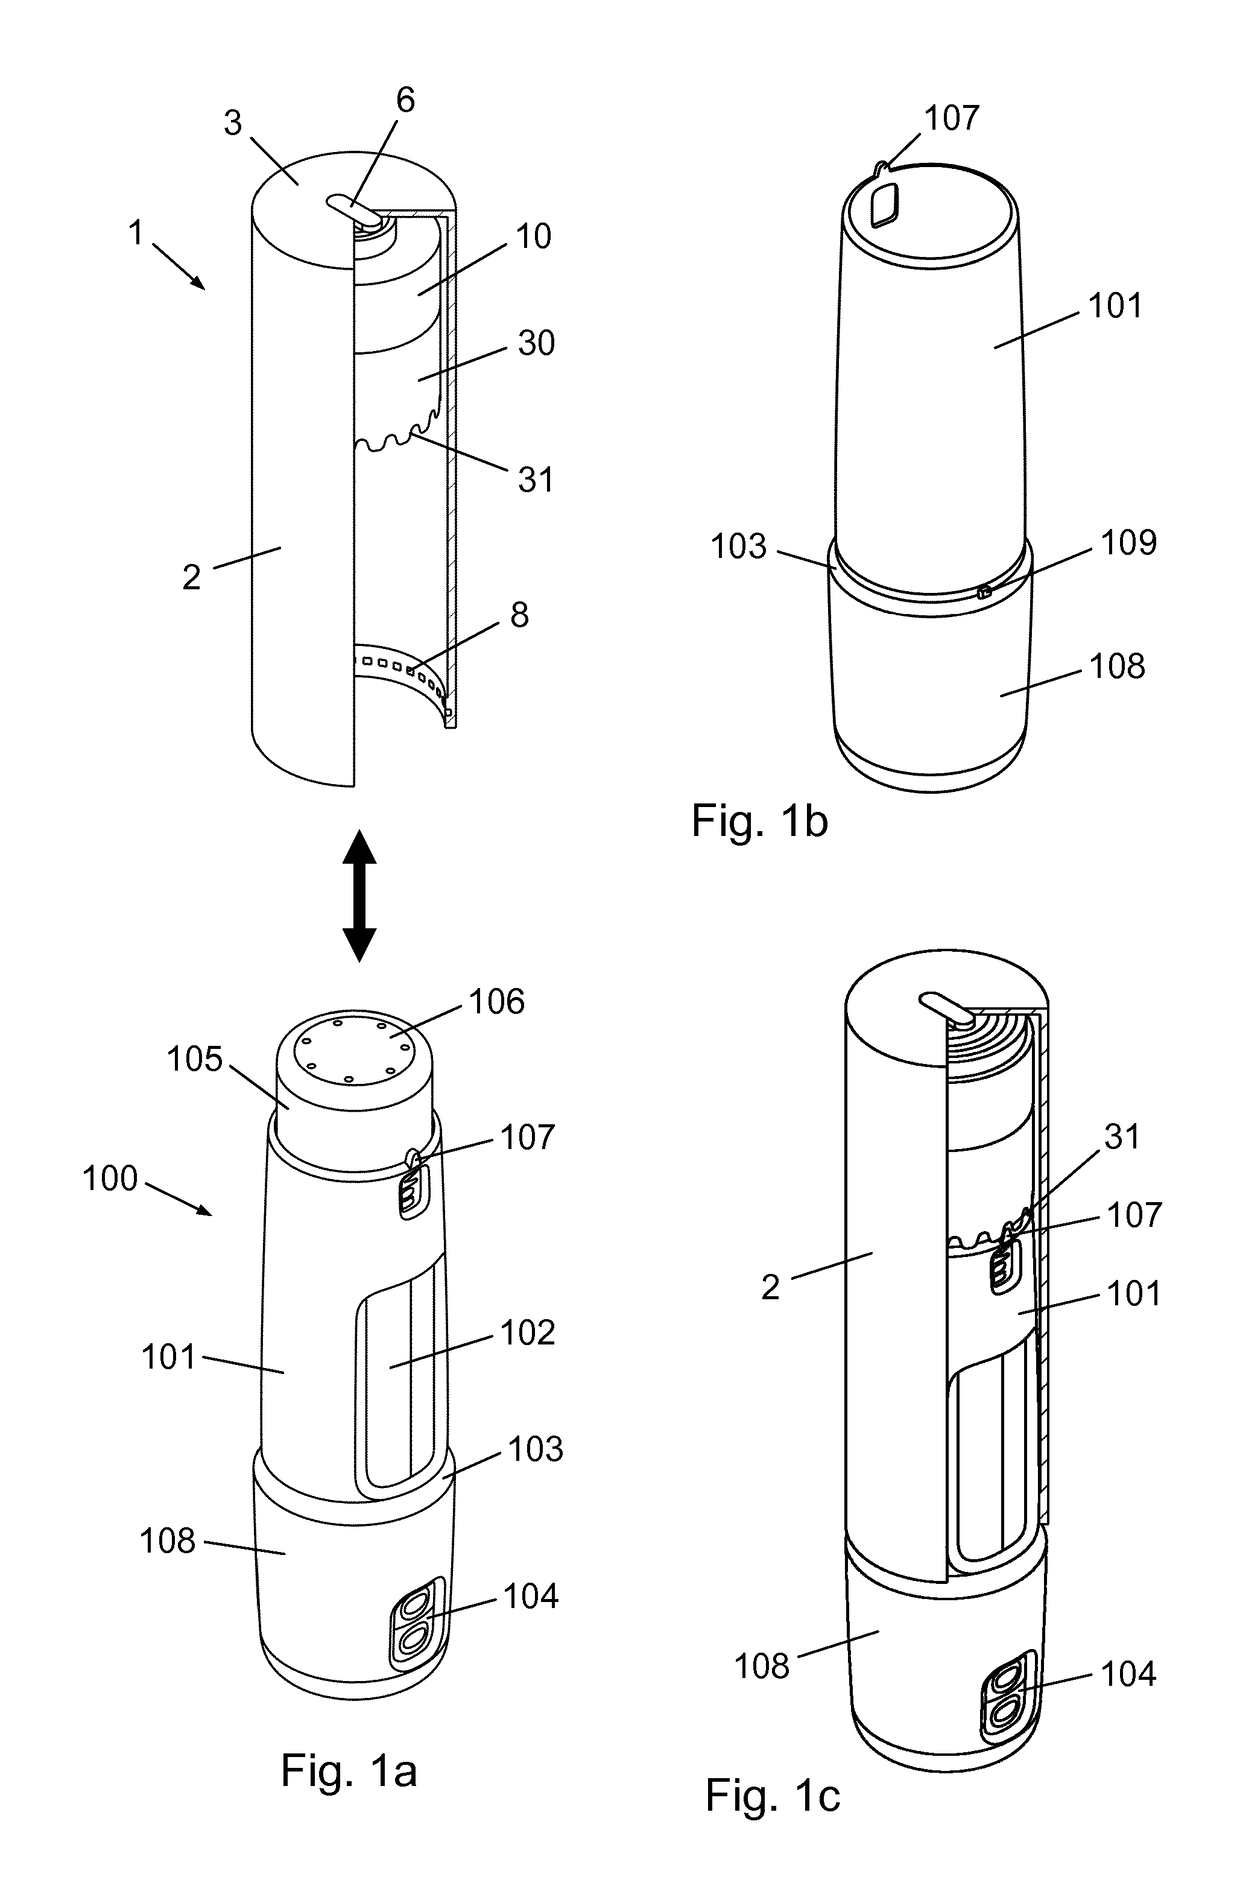 State changing appliance for a drug delivery device